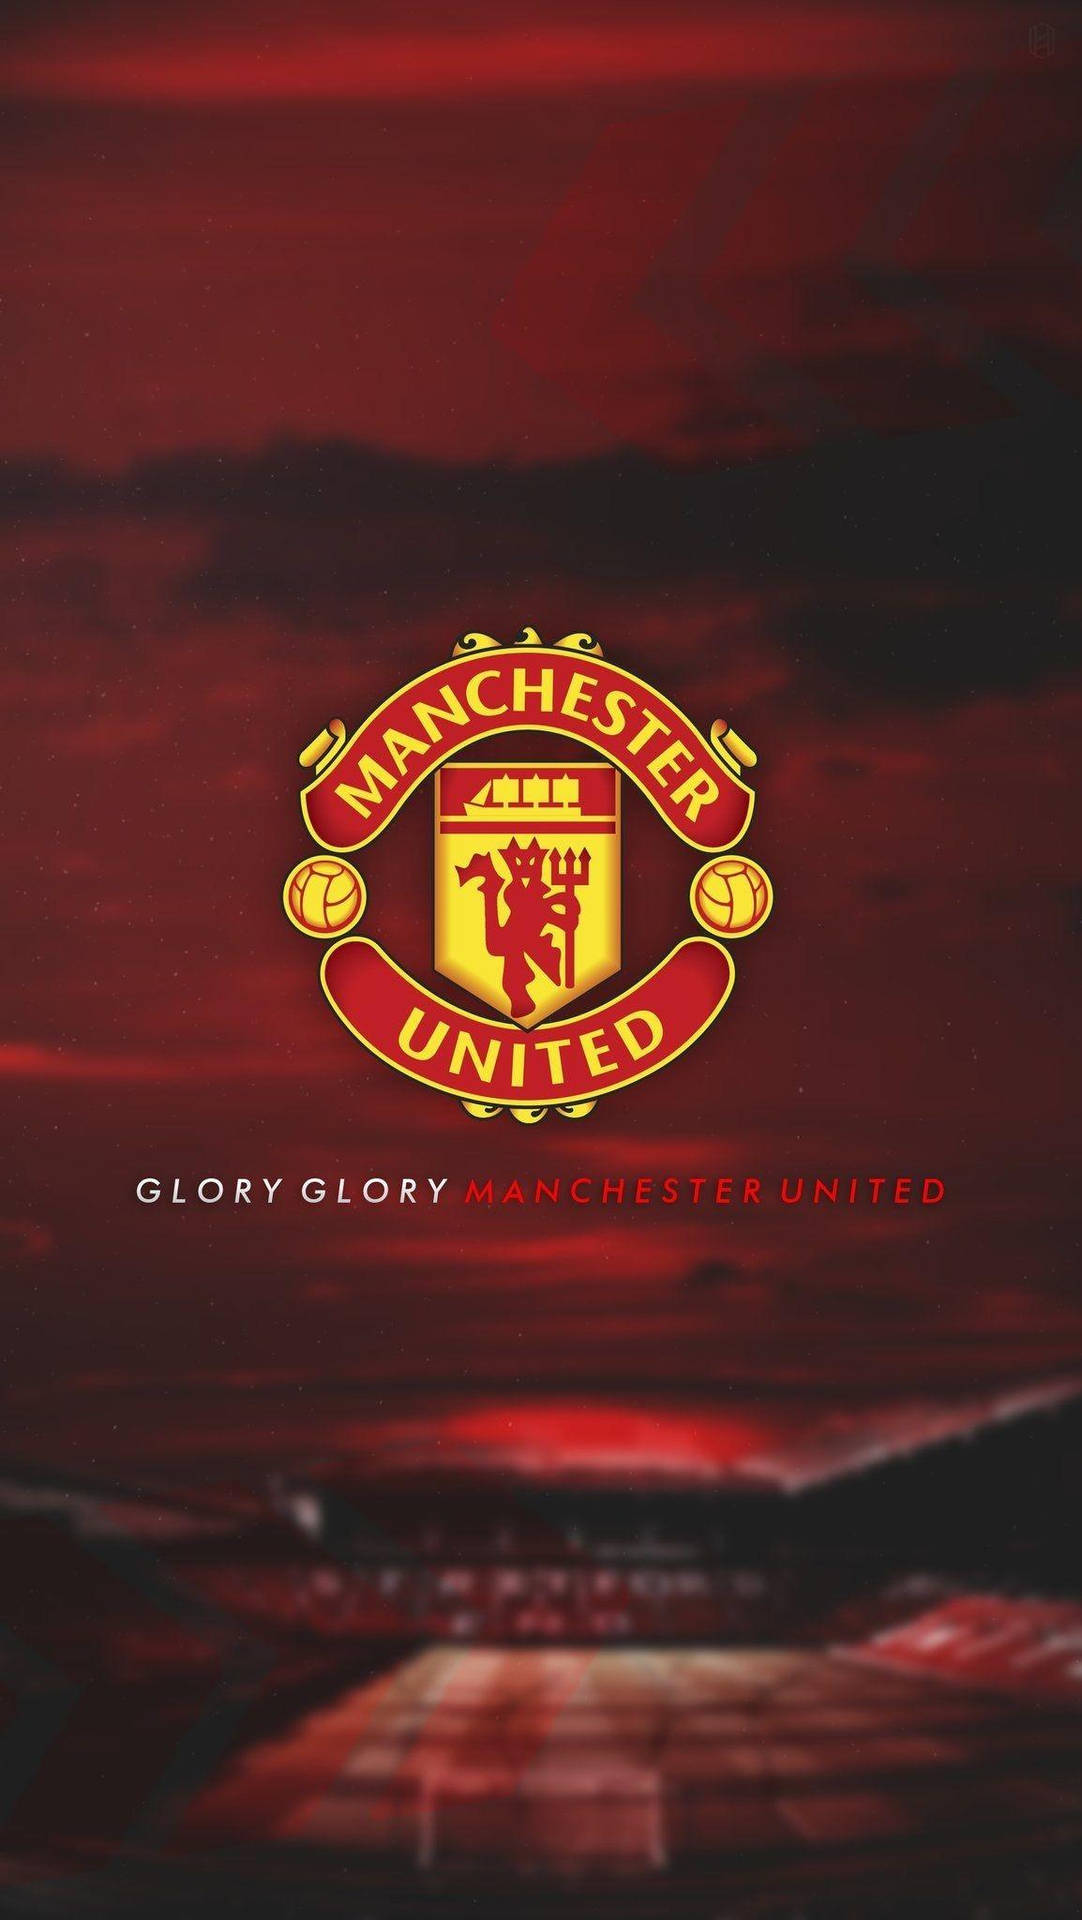 Manchester United Emblem With A Fiery Background Wallpaper